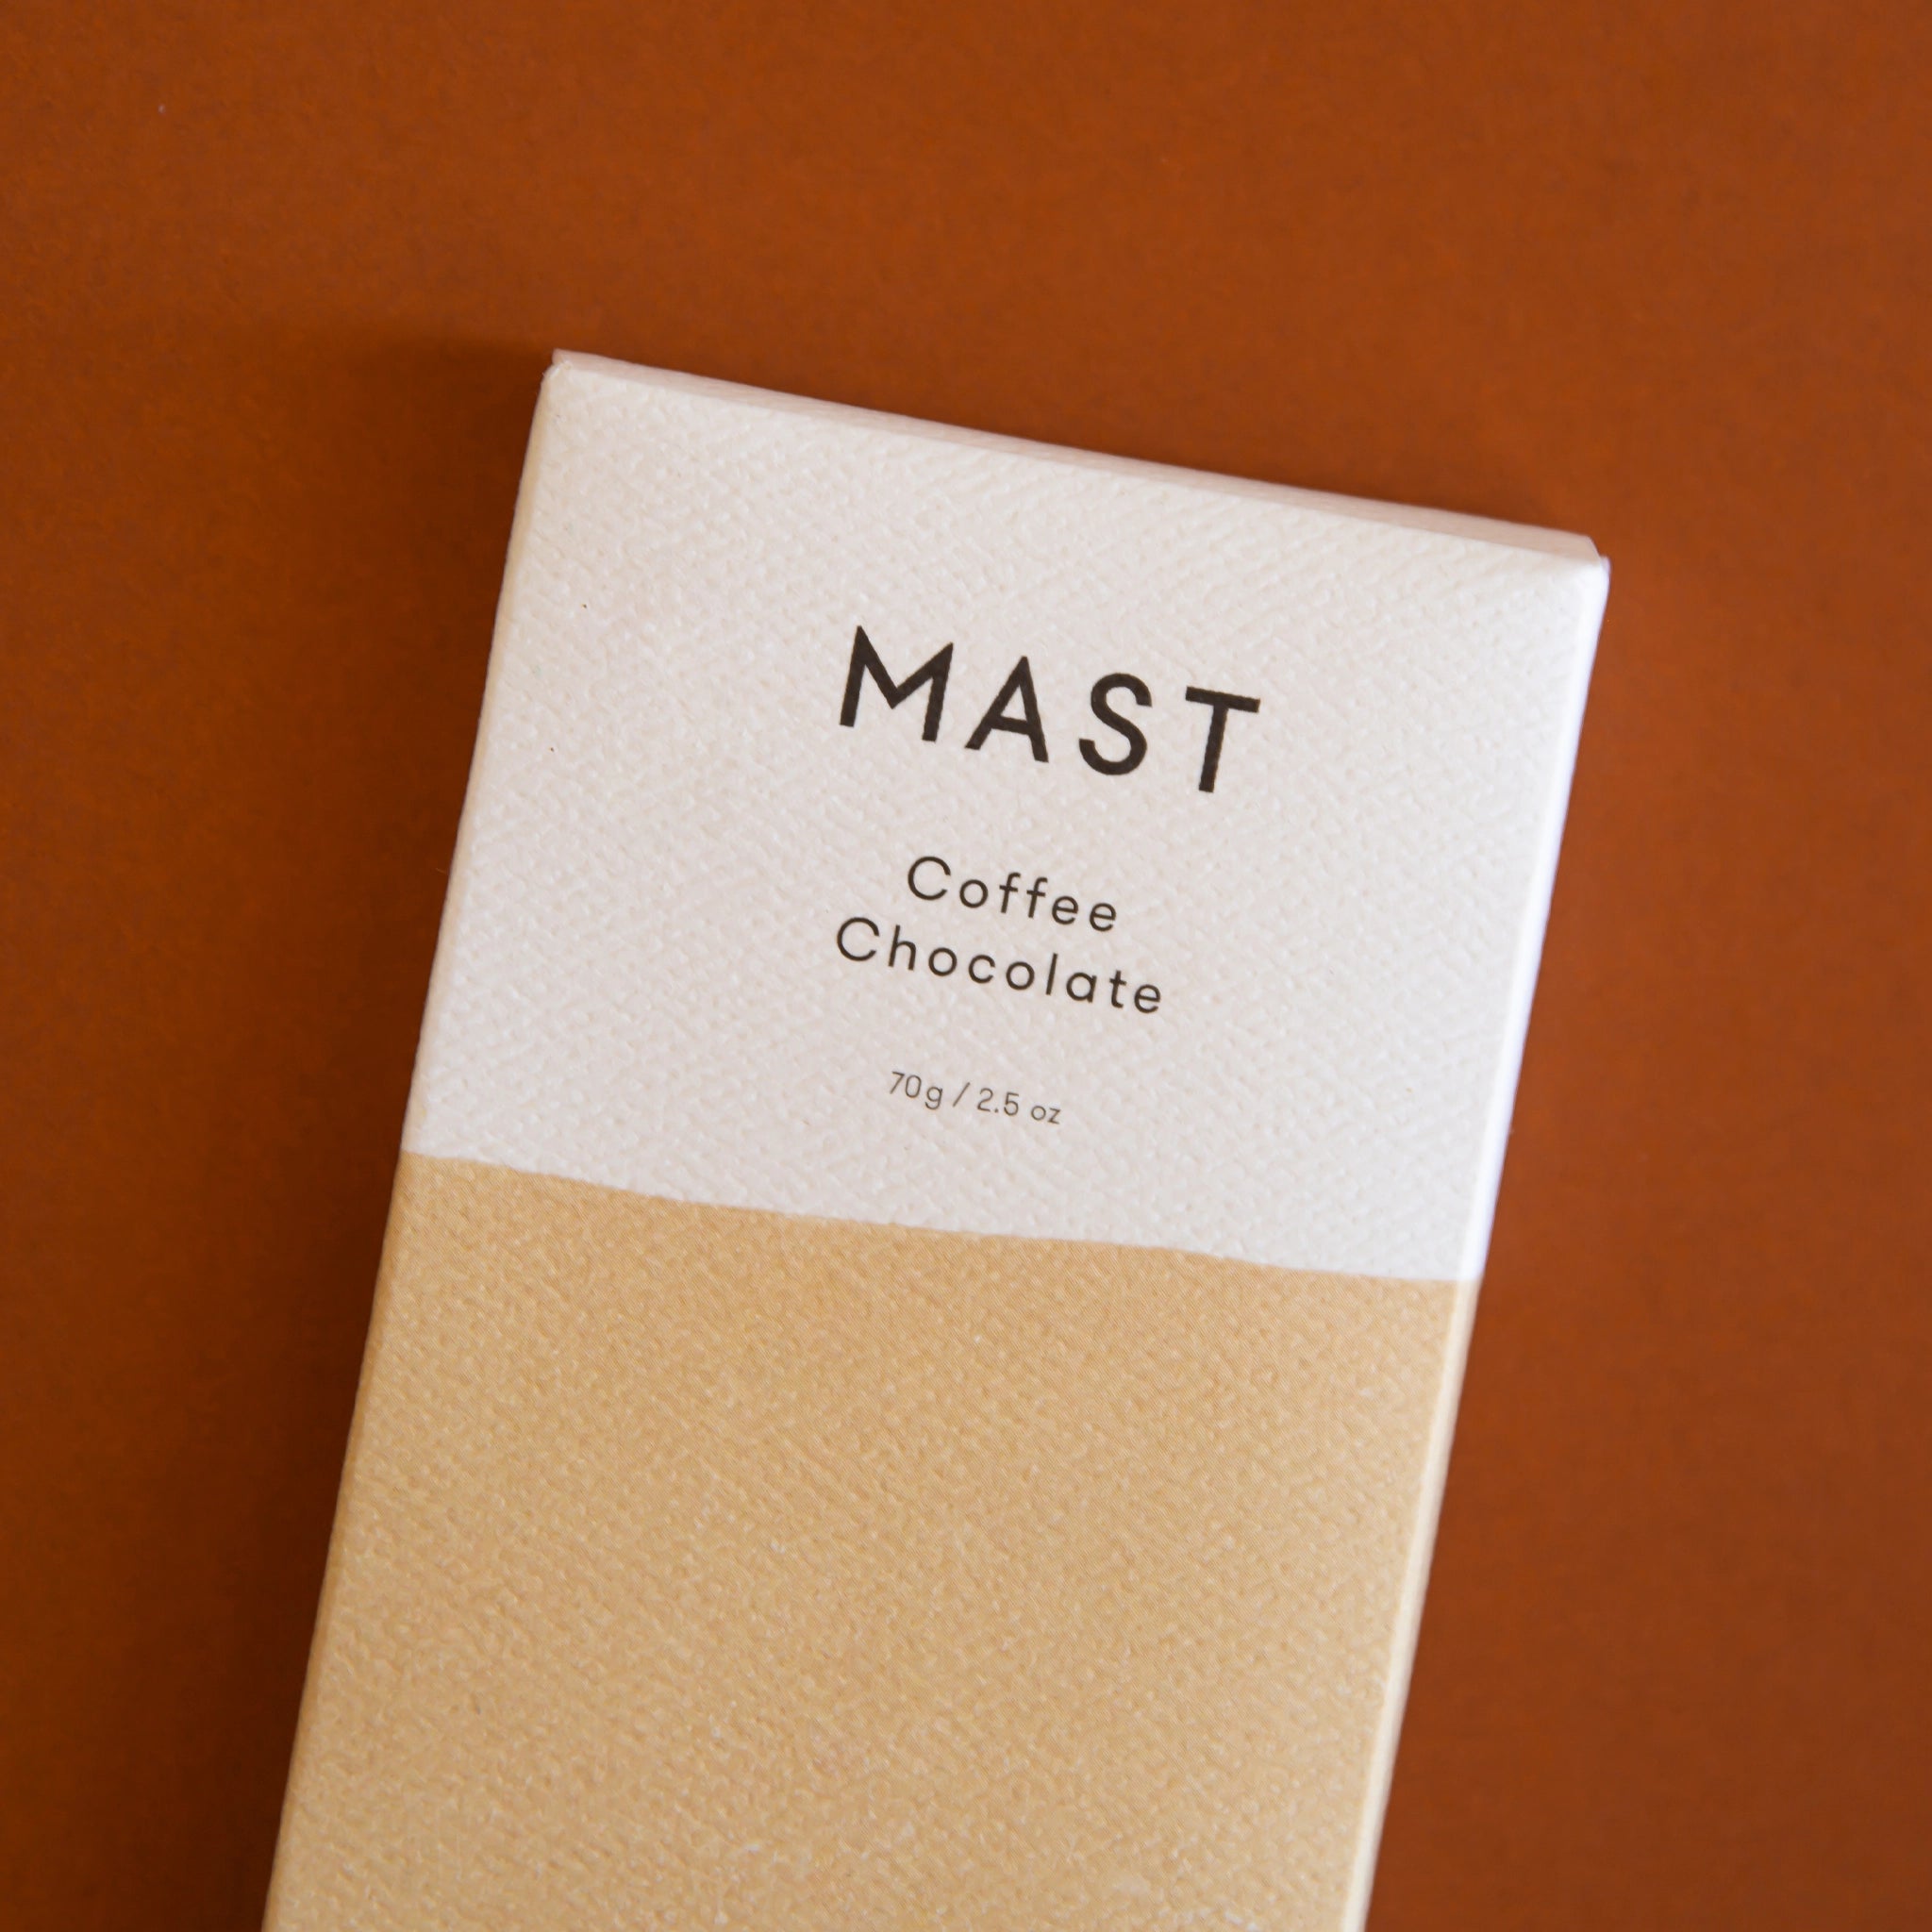 A rectangle chocolate bar packaged in a white and tan wrapper with black text that reads, "MAST Coffee Chocolate".